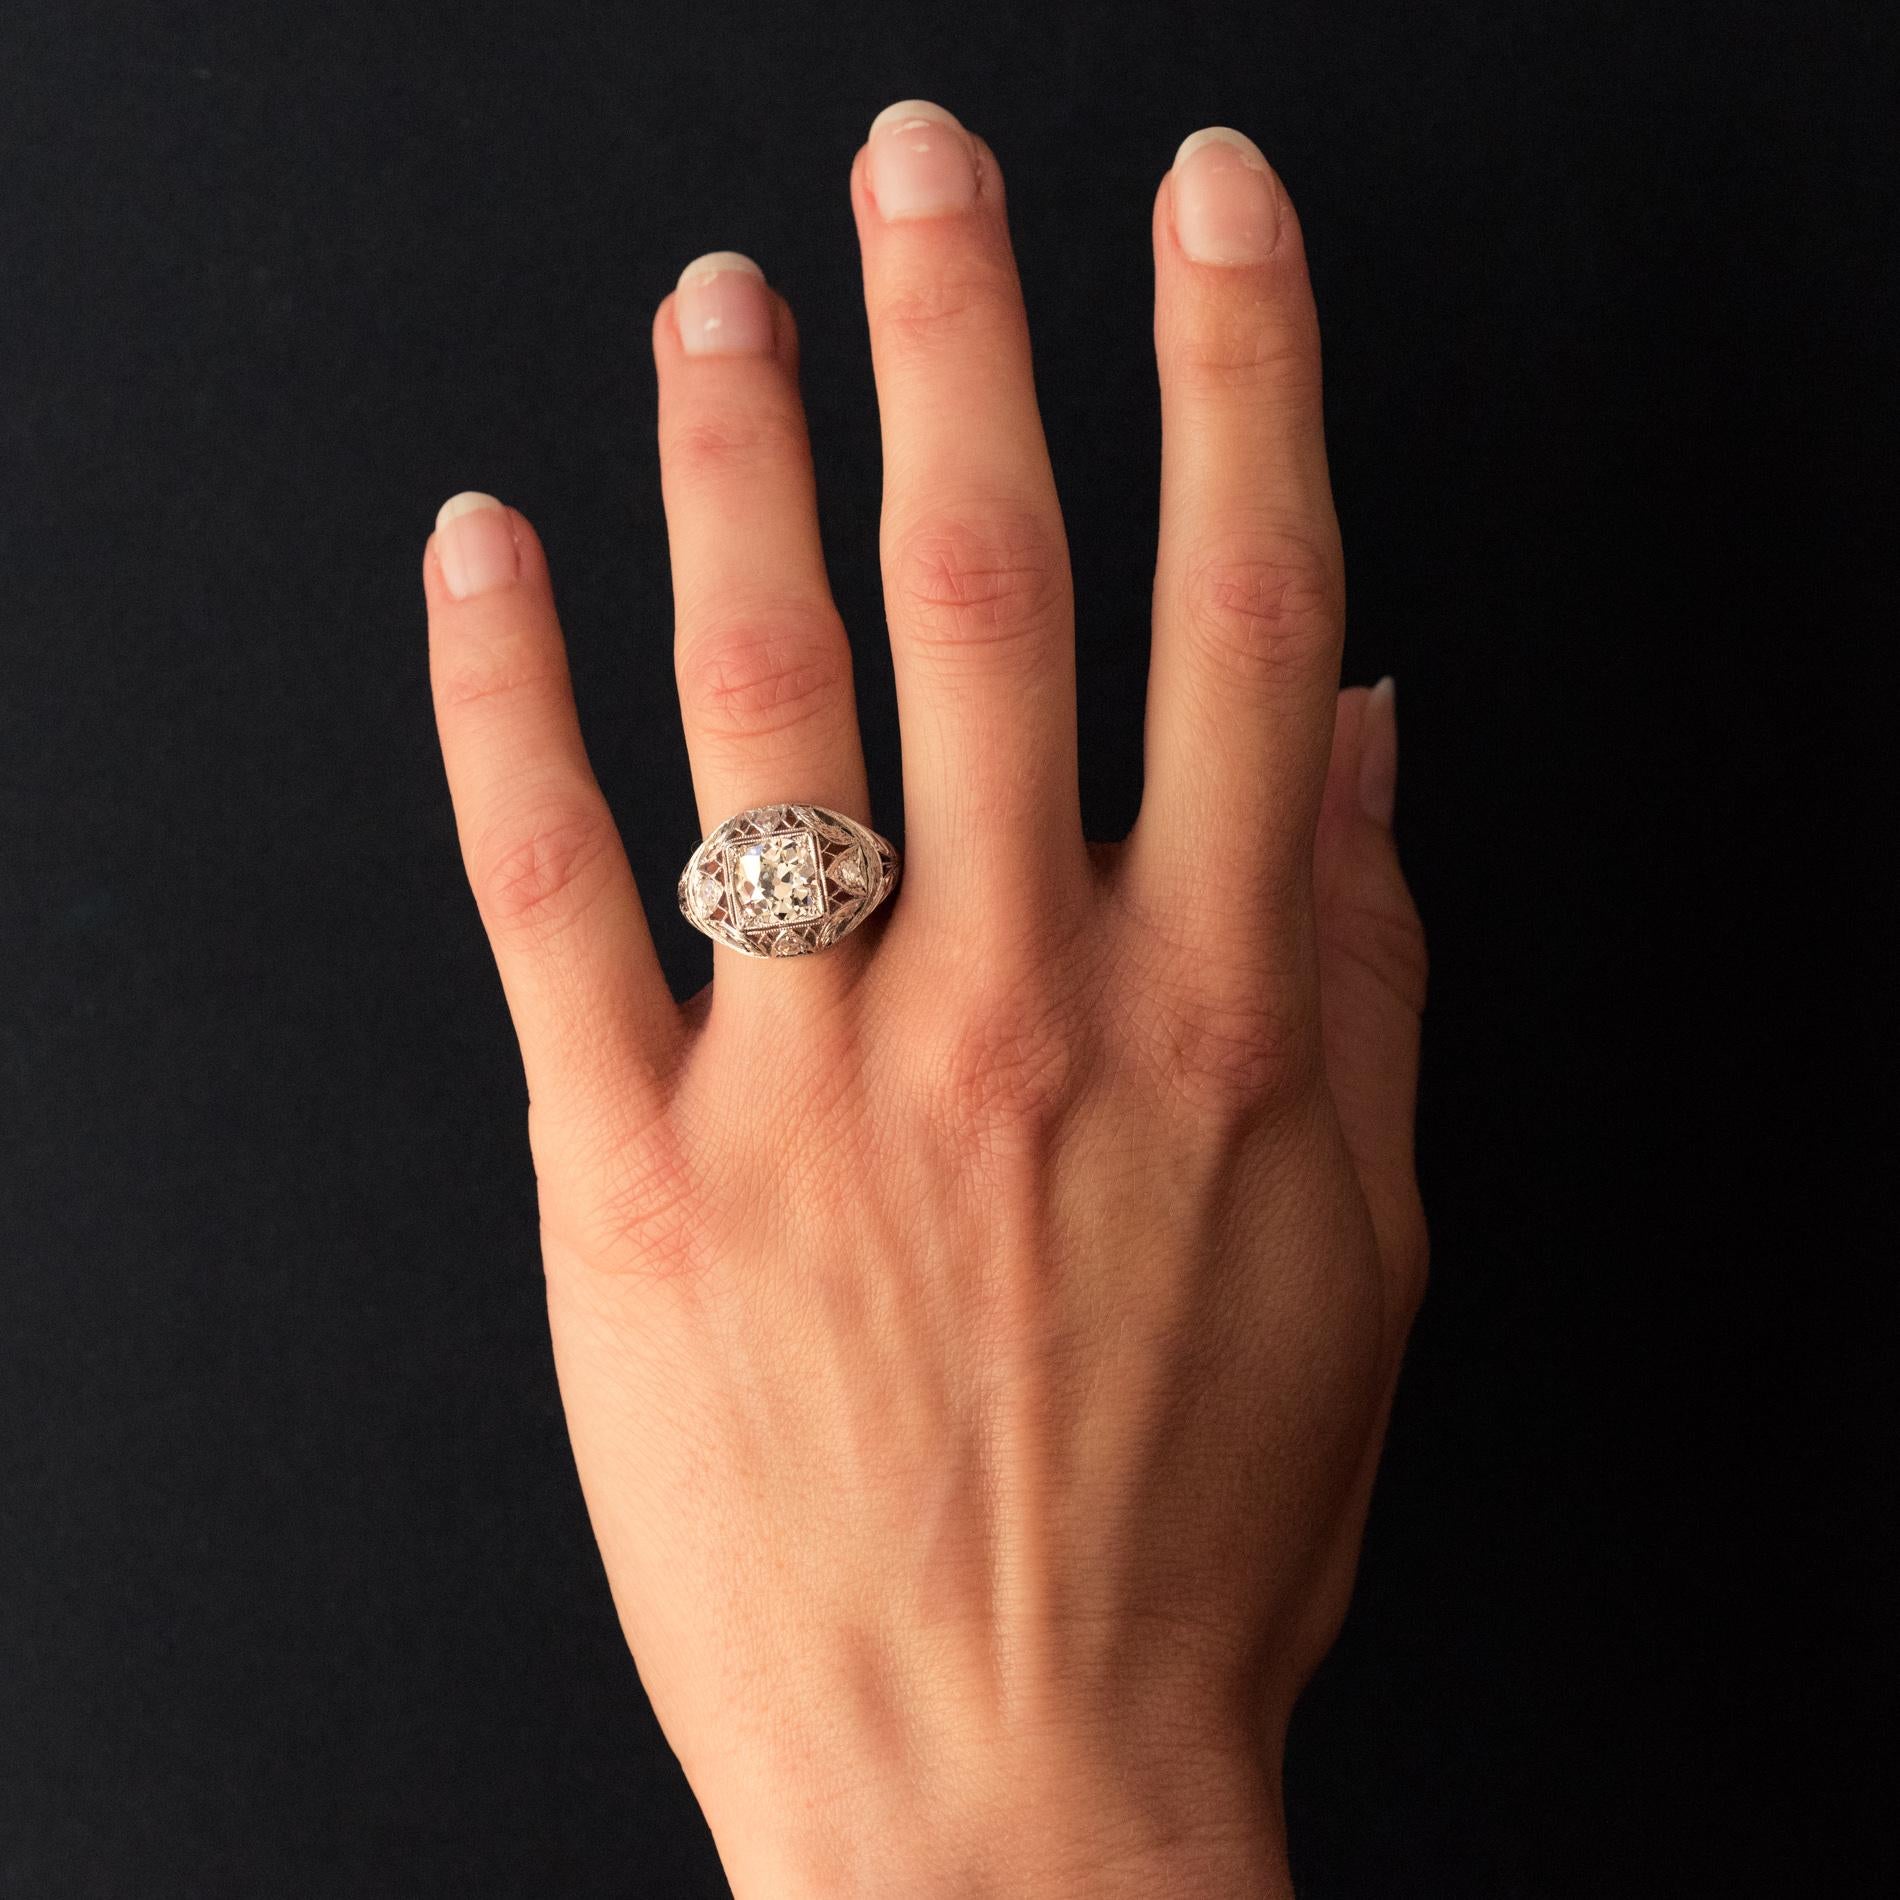 Ring in platinum.
Sublime antique dome-shaped ring, it is set on its top with a geometric decoration of an antique brilliant-cut diamond. The entire mounting is delicately engraved, perforated and set with 4 diamonds with 4 cardinal points.
Main